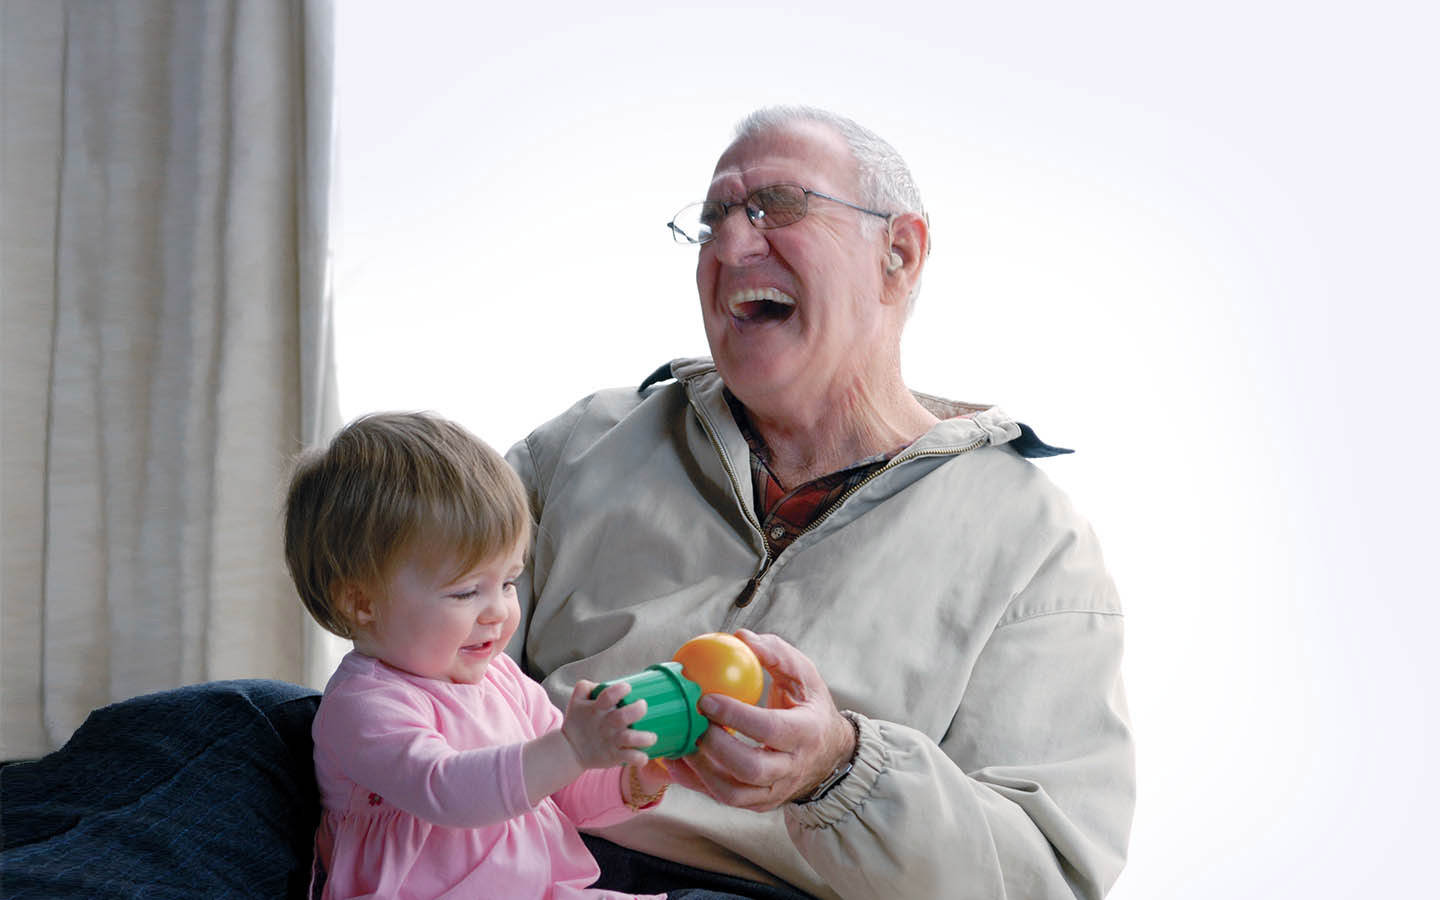 An elderly implant recipient laughs as his grandchild sits on his lap